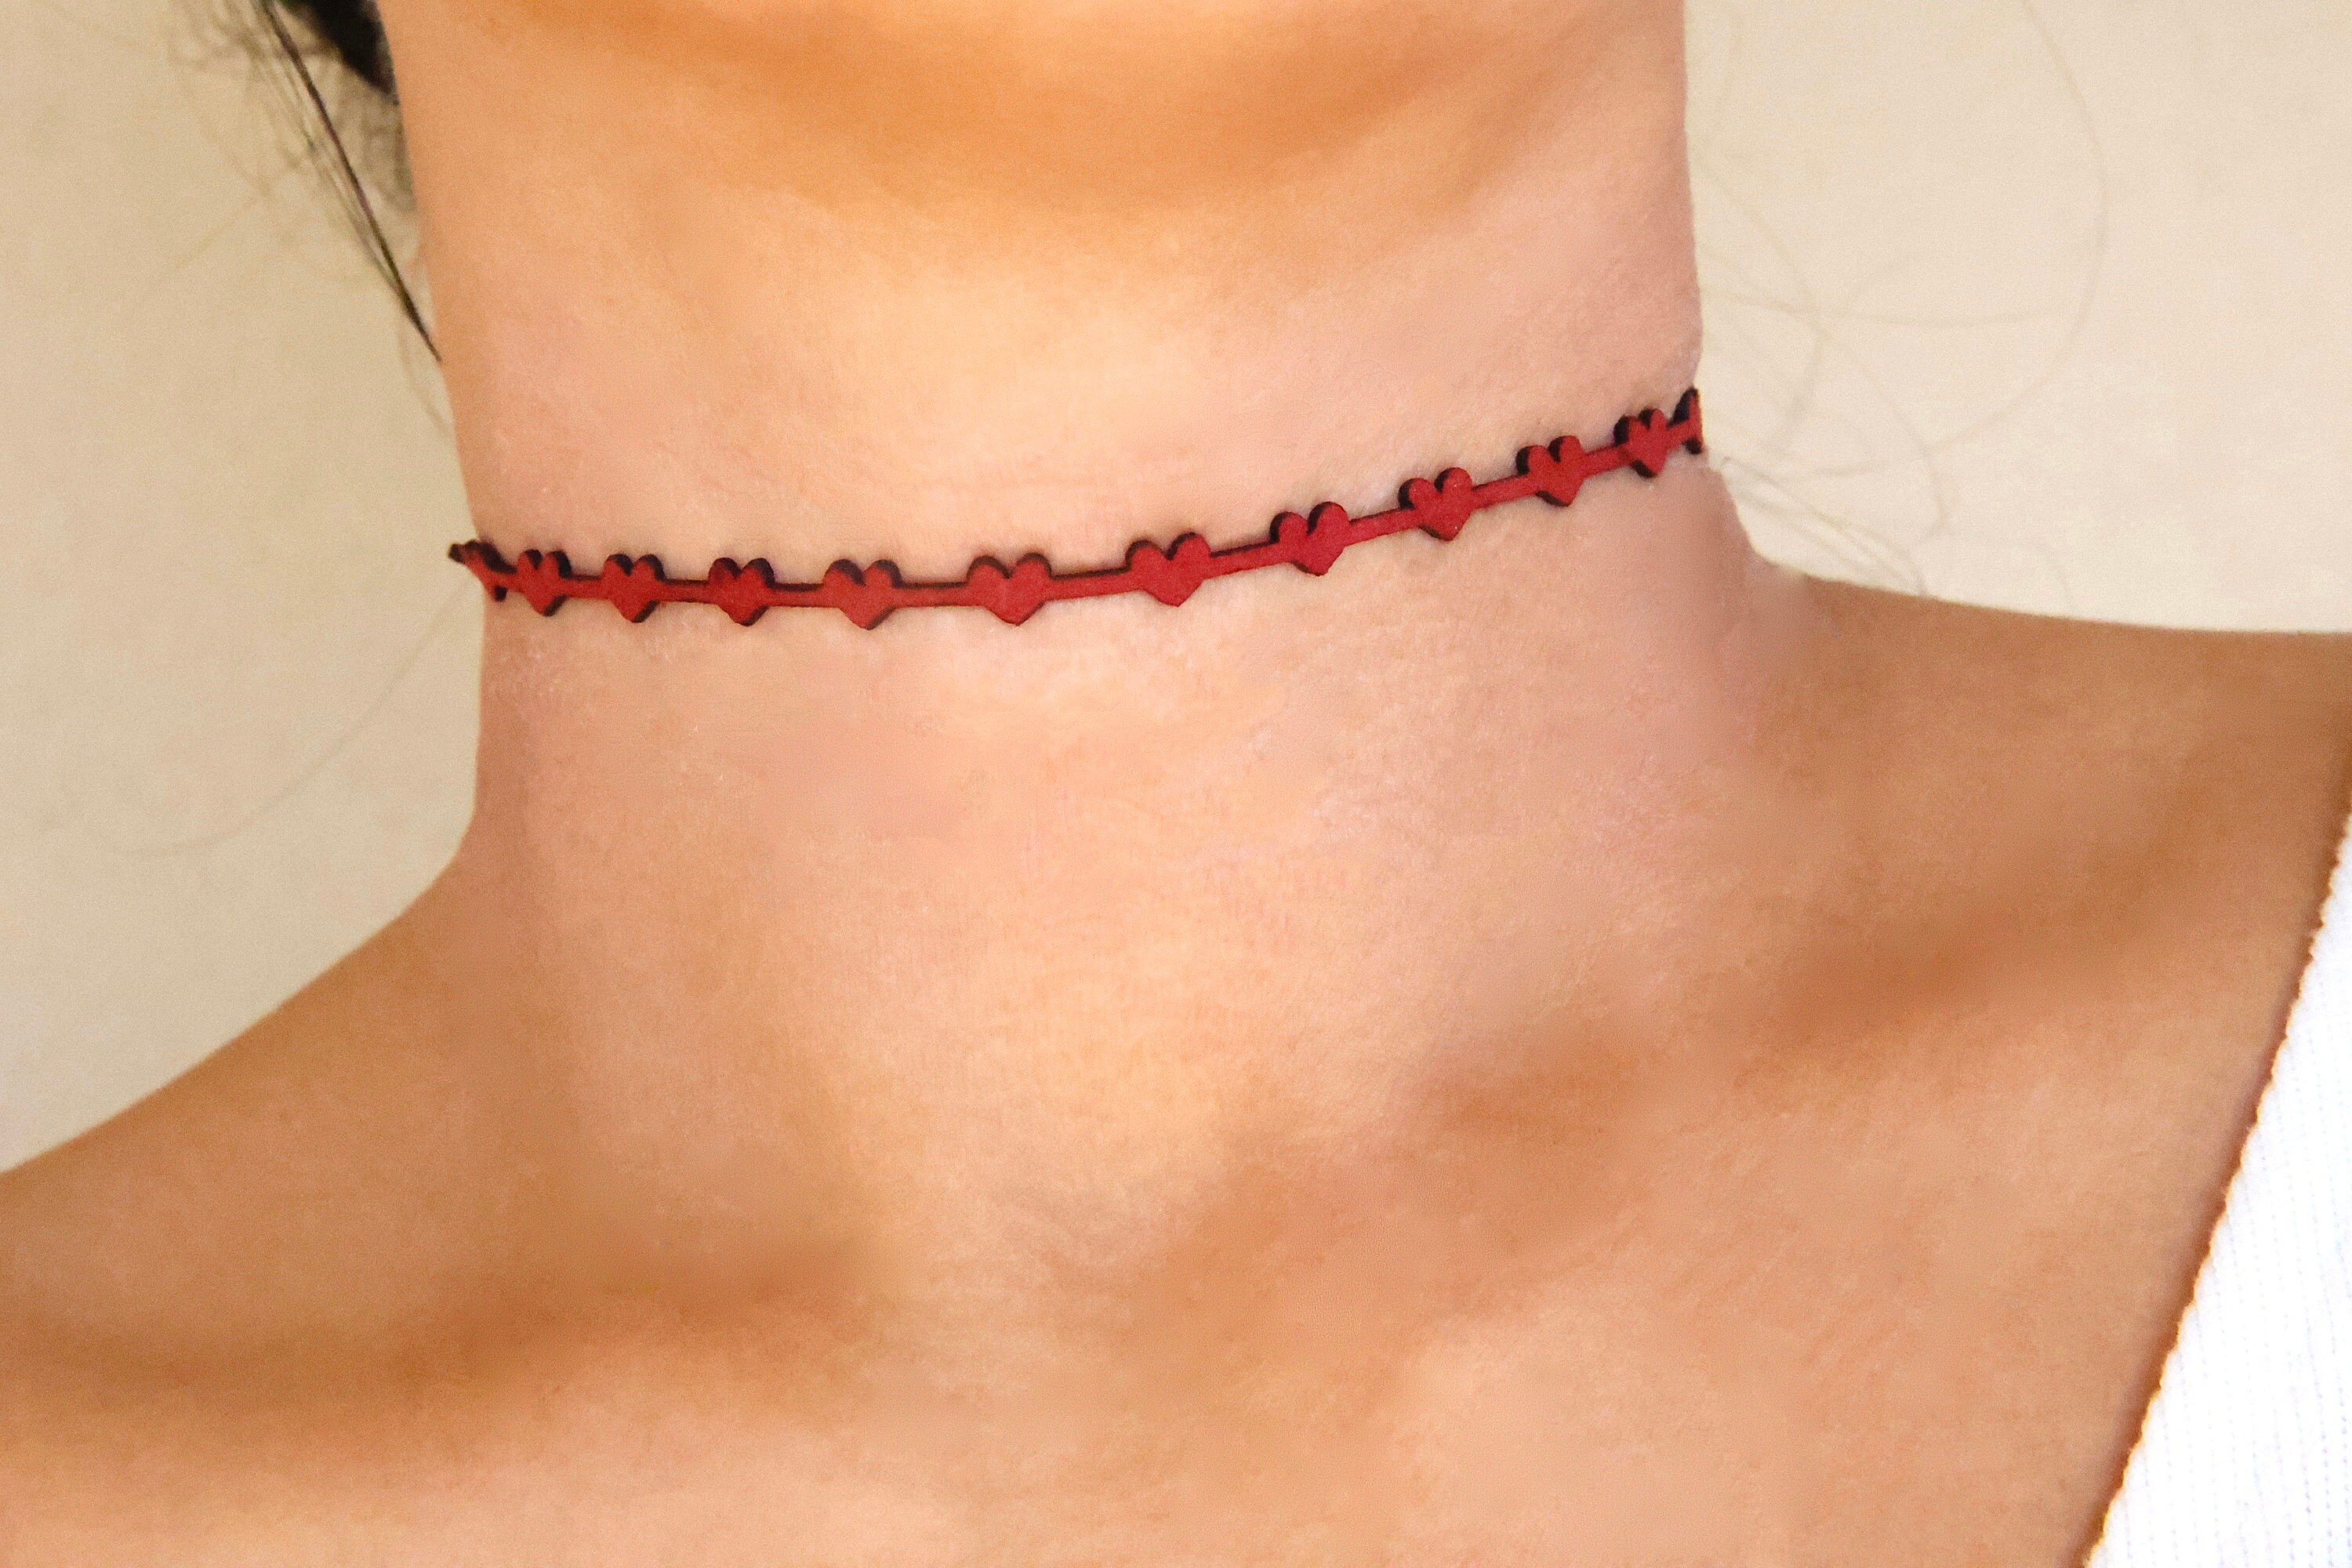 Red Choker/Thick Red Chokers/ Spring Necklace/Glittery Choker/ SpringChoker/Glitter Choker/Large Red Choker/RedAdjustable